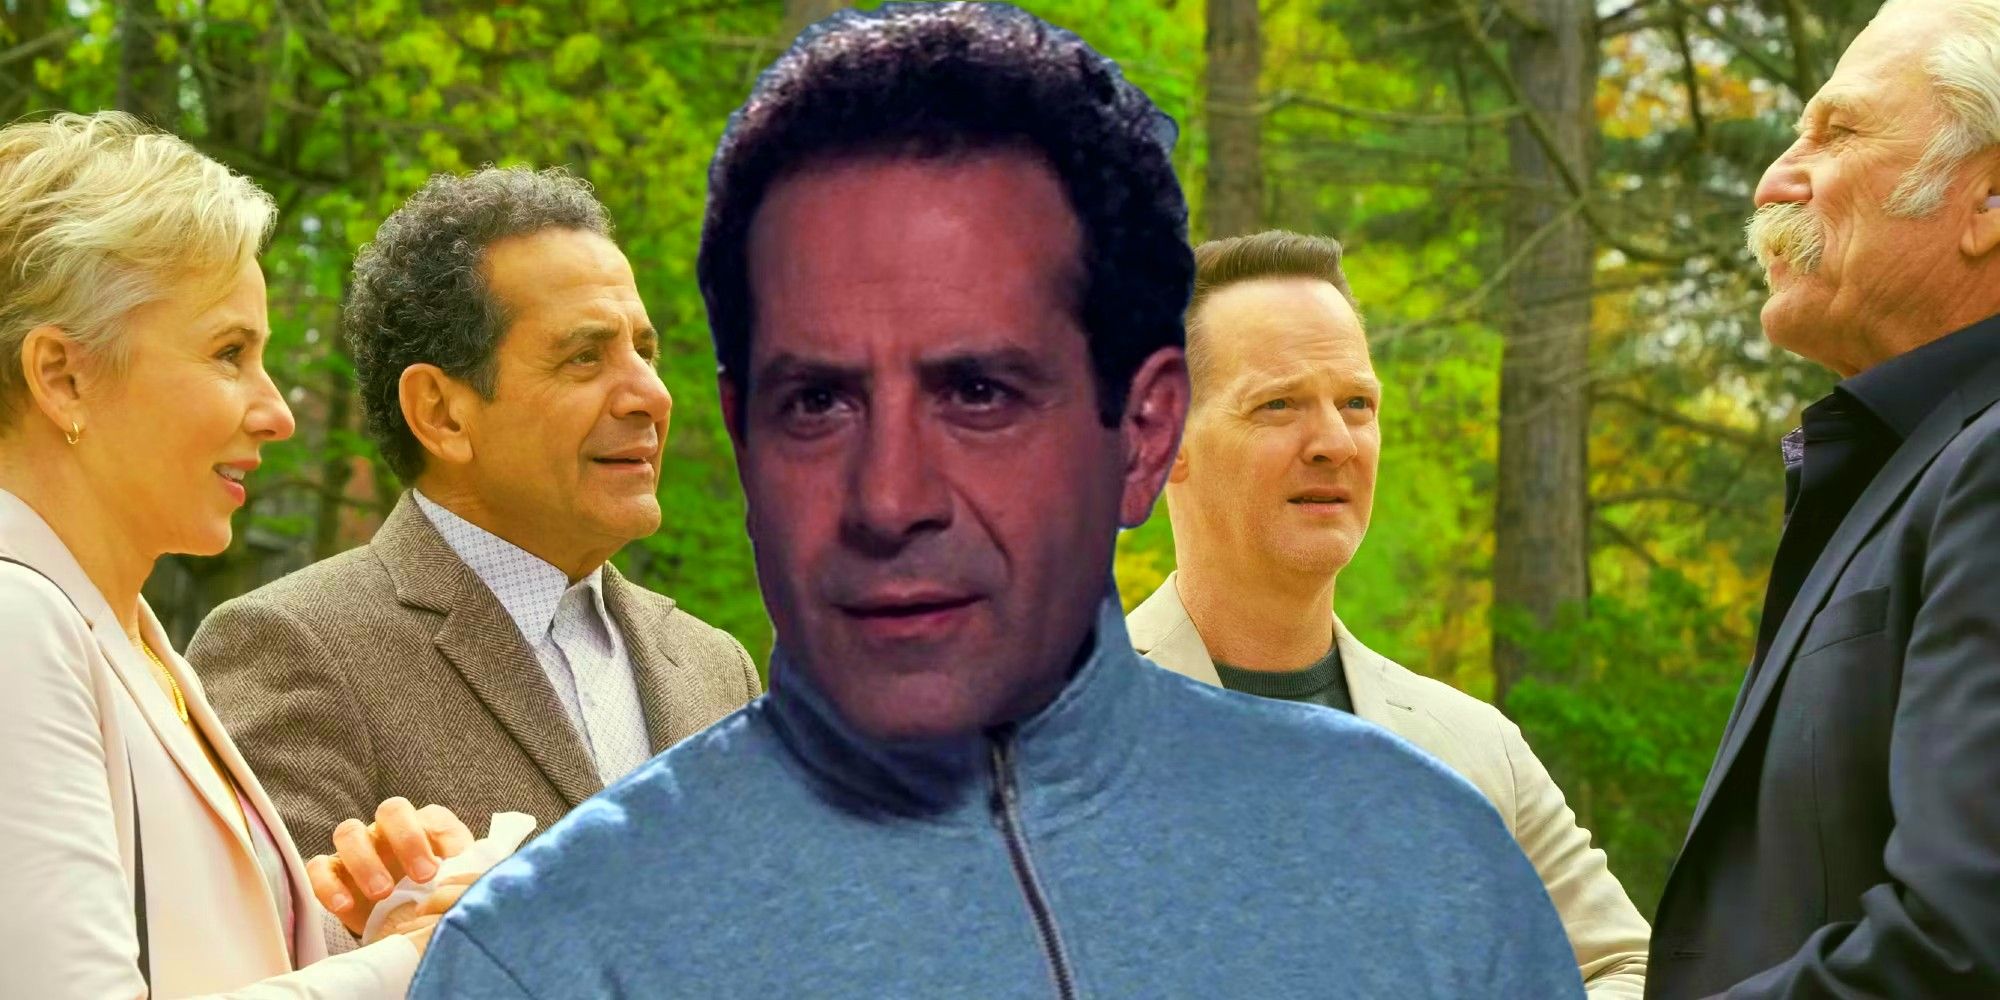 Adrian Monk (Tony Shalhoub) in Monk in front of Natalie Teeger (Traylor Howard), Randy Disher (Jason Gray-Stanford), and Leland Stottlemeyer (Ted Levine) in Mr. Monk’s Last Case: A Monk Movie